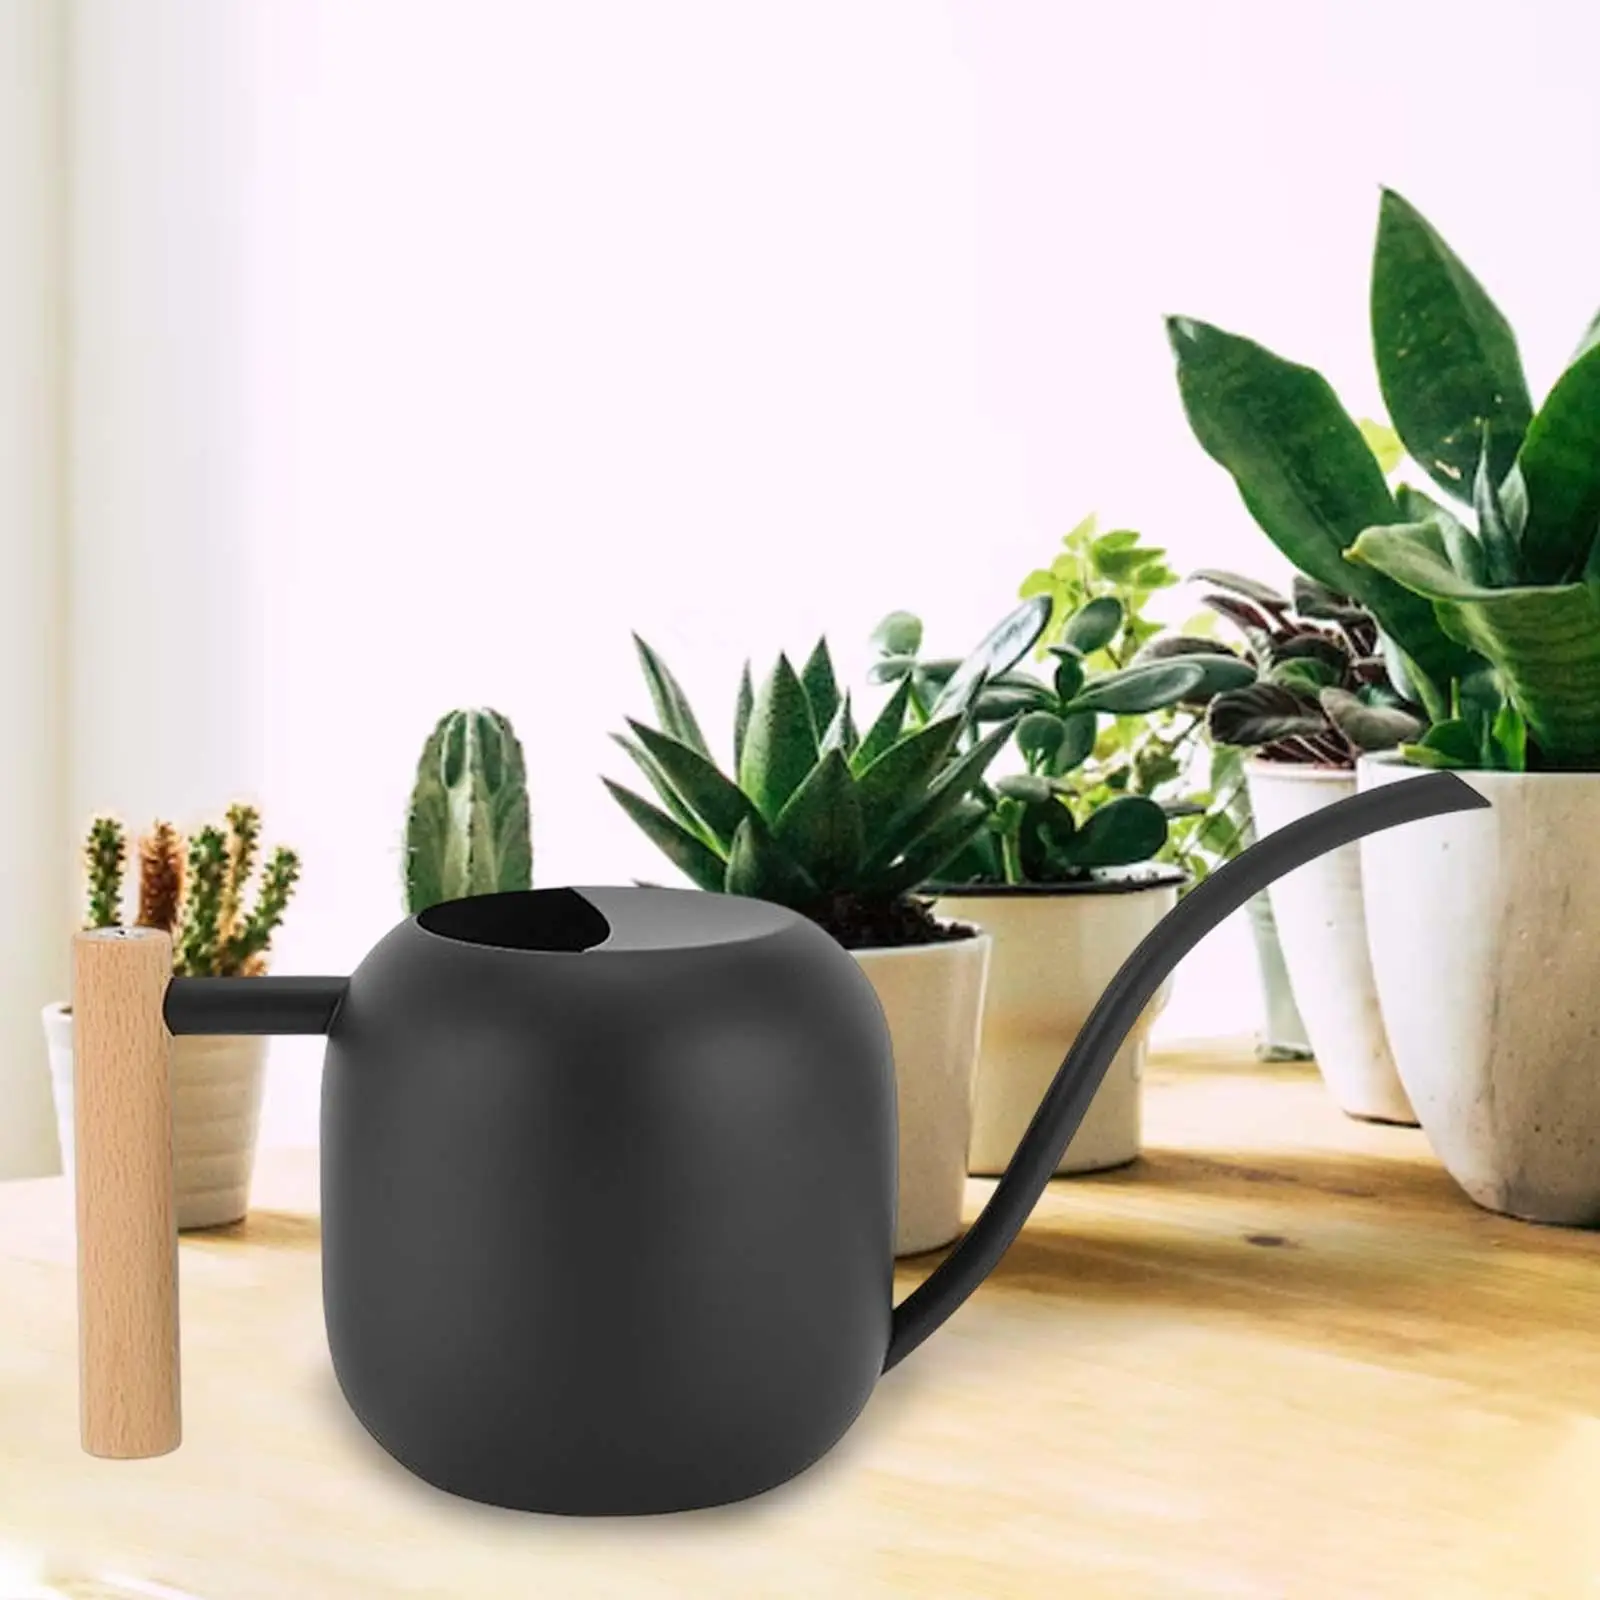 Watering Can with Long Mouth Wooden Handle 1.2L Watering Pot Watering Flower Kettle for Home Bonsai Outdoor Patio Decor